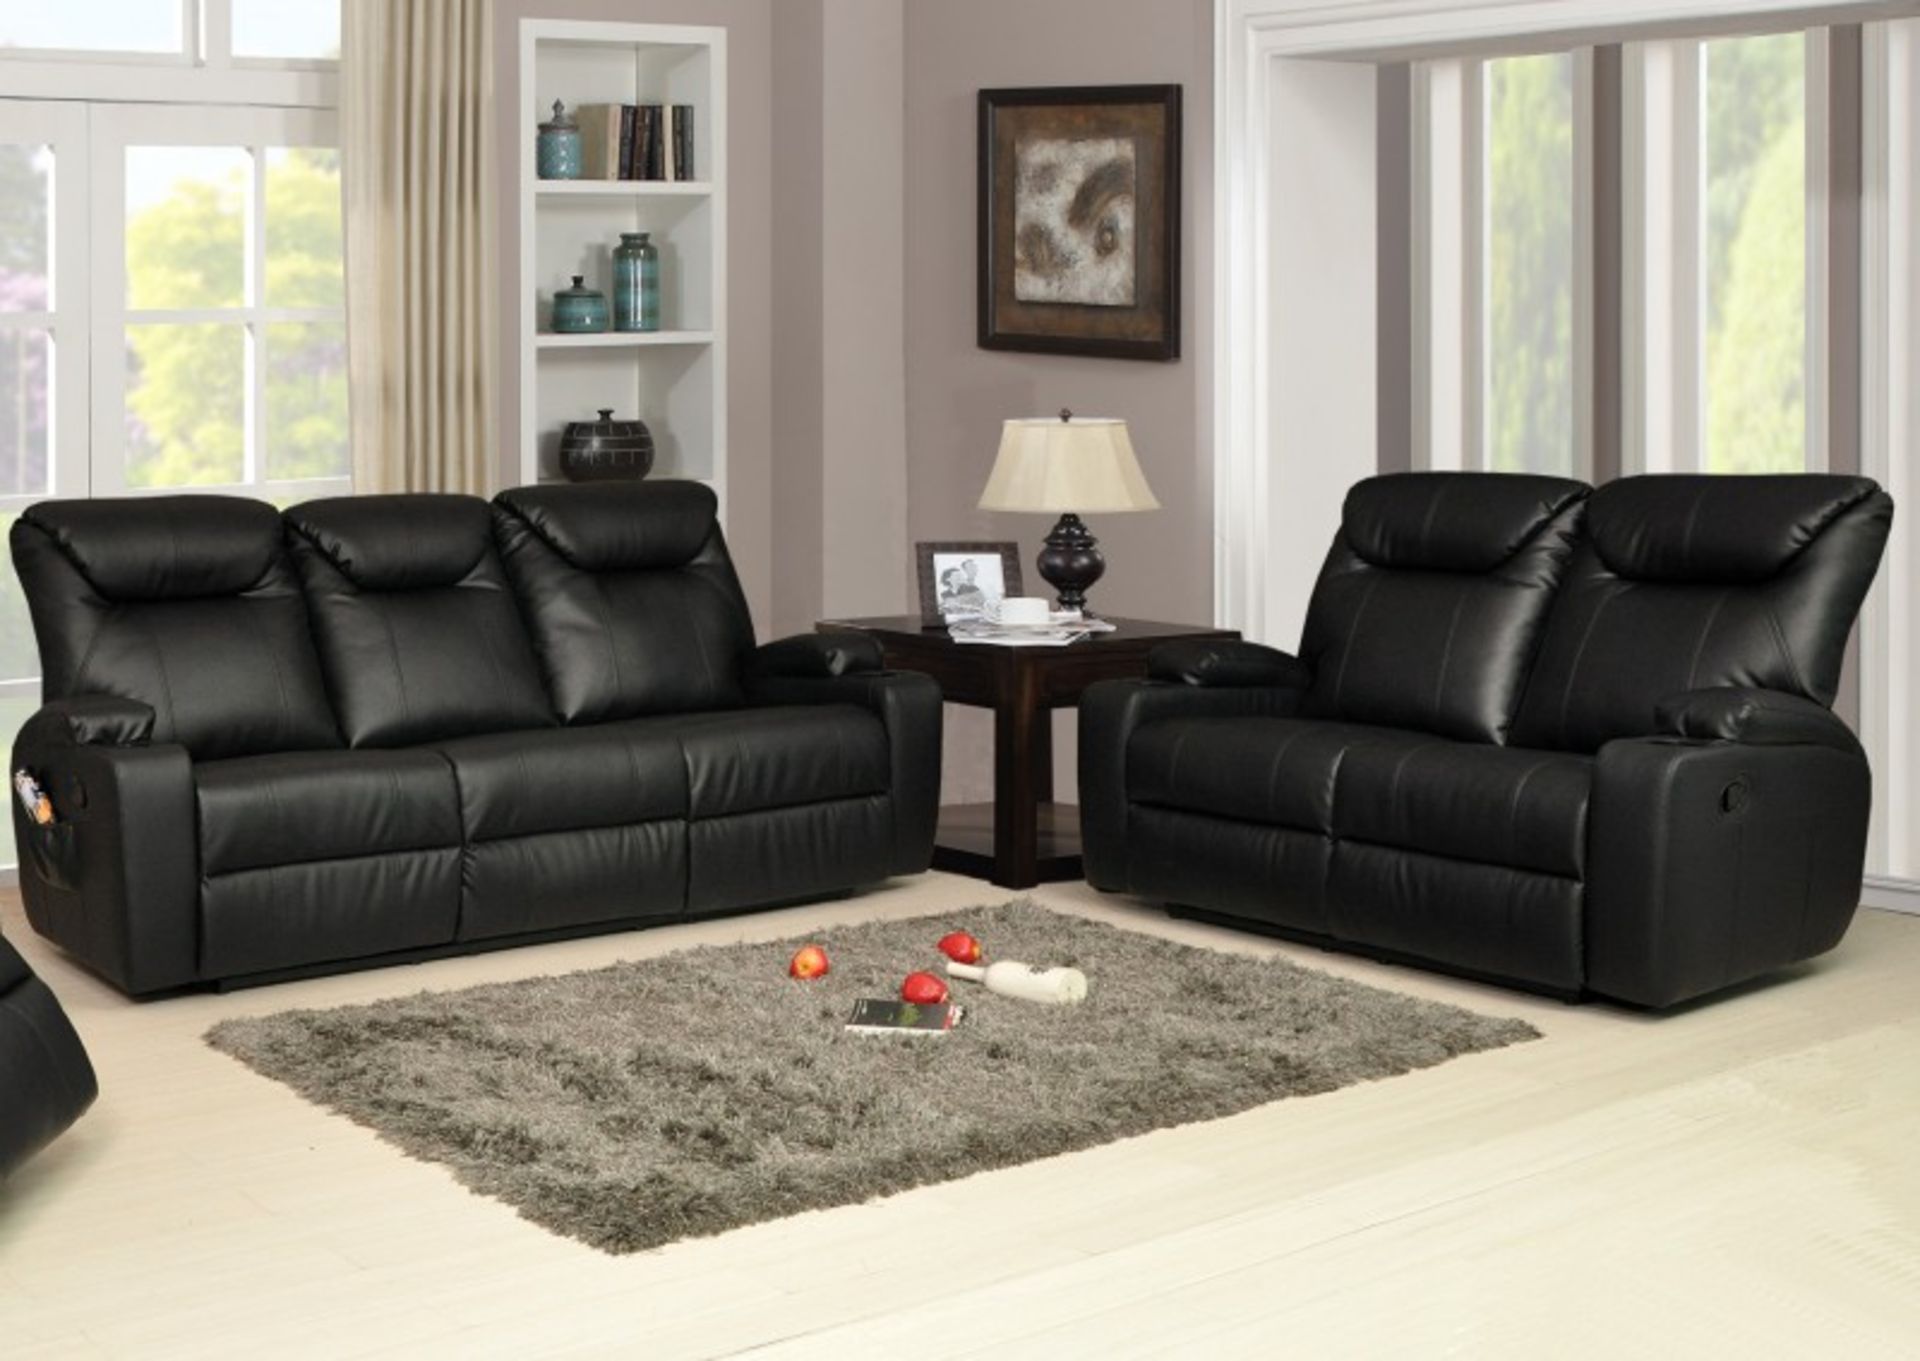 Brand new boxed direct from the manufacturers lazy boy 3 seater and 2 seater reclining leather sofas